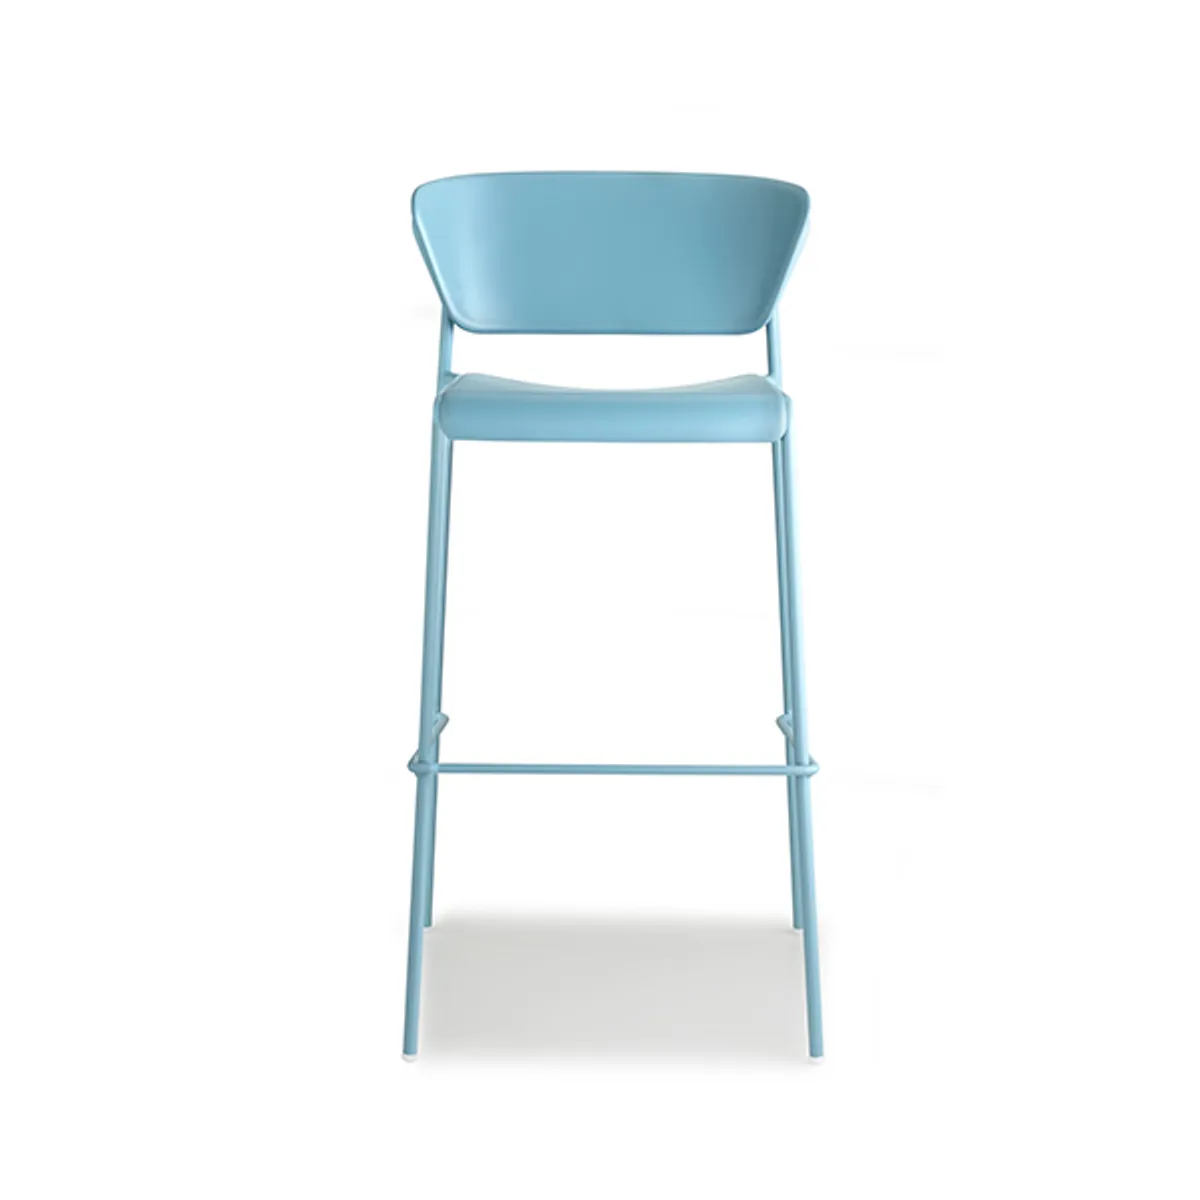 Robyn Soft Outdoor Bar Stool Cafe Furniture Insideoutcontracts 021